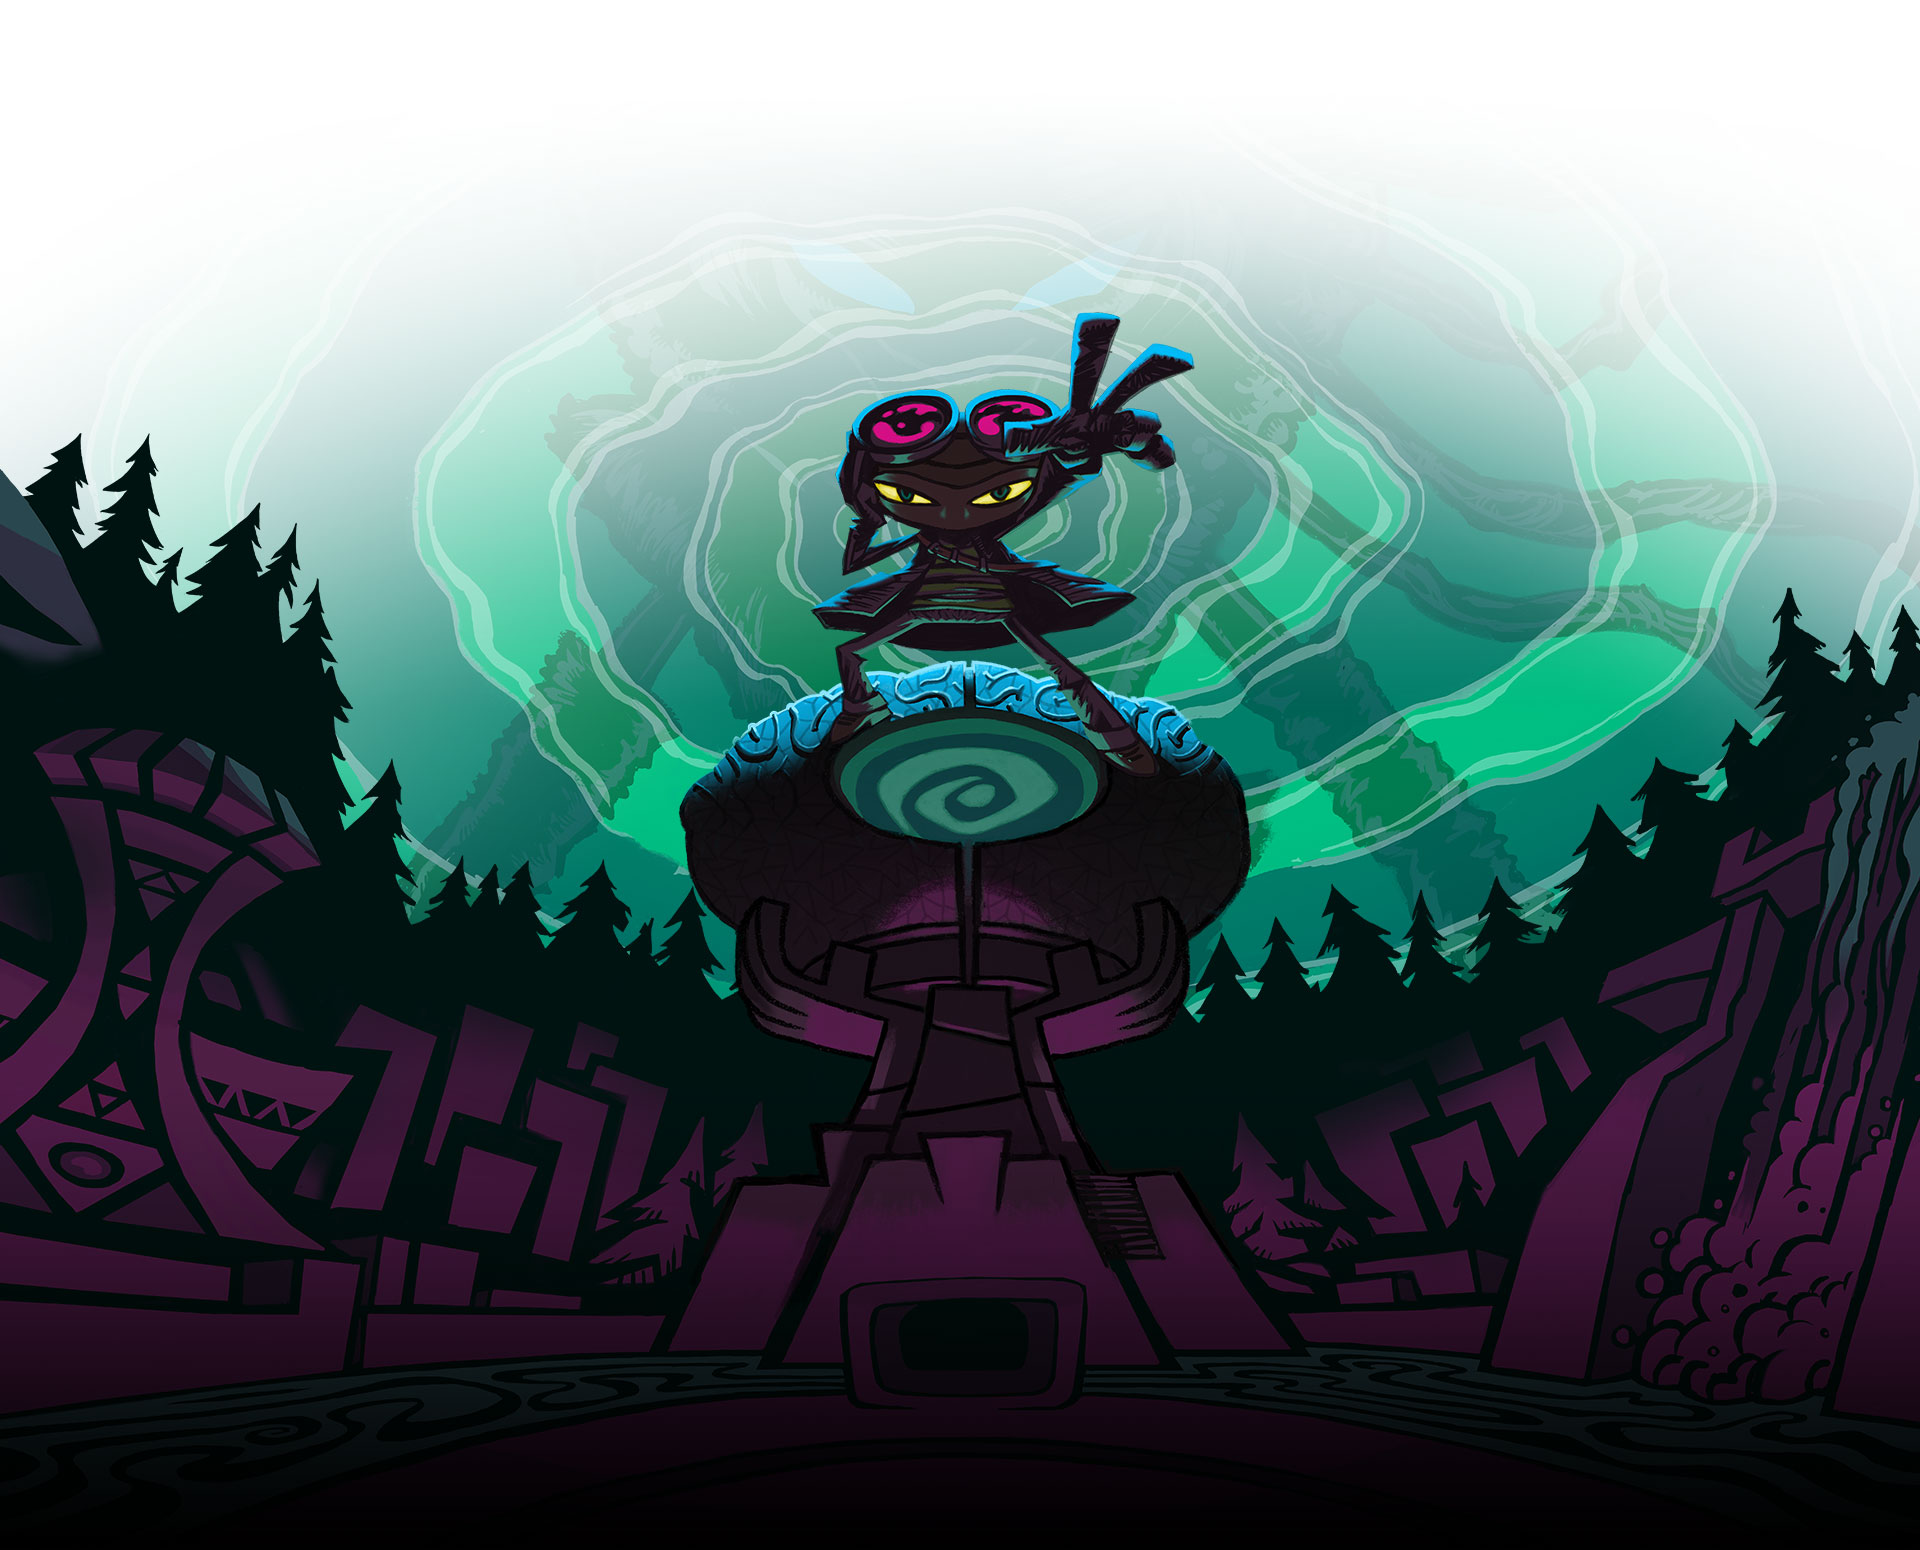 Psychonauts 2. Raz uses psychic powers in the midst of a river valley surrounded by trees.